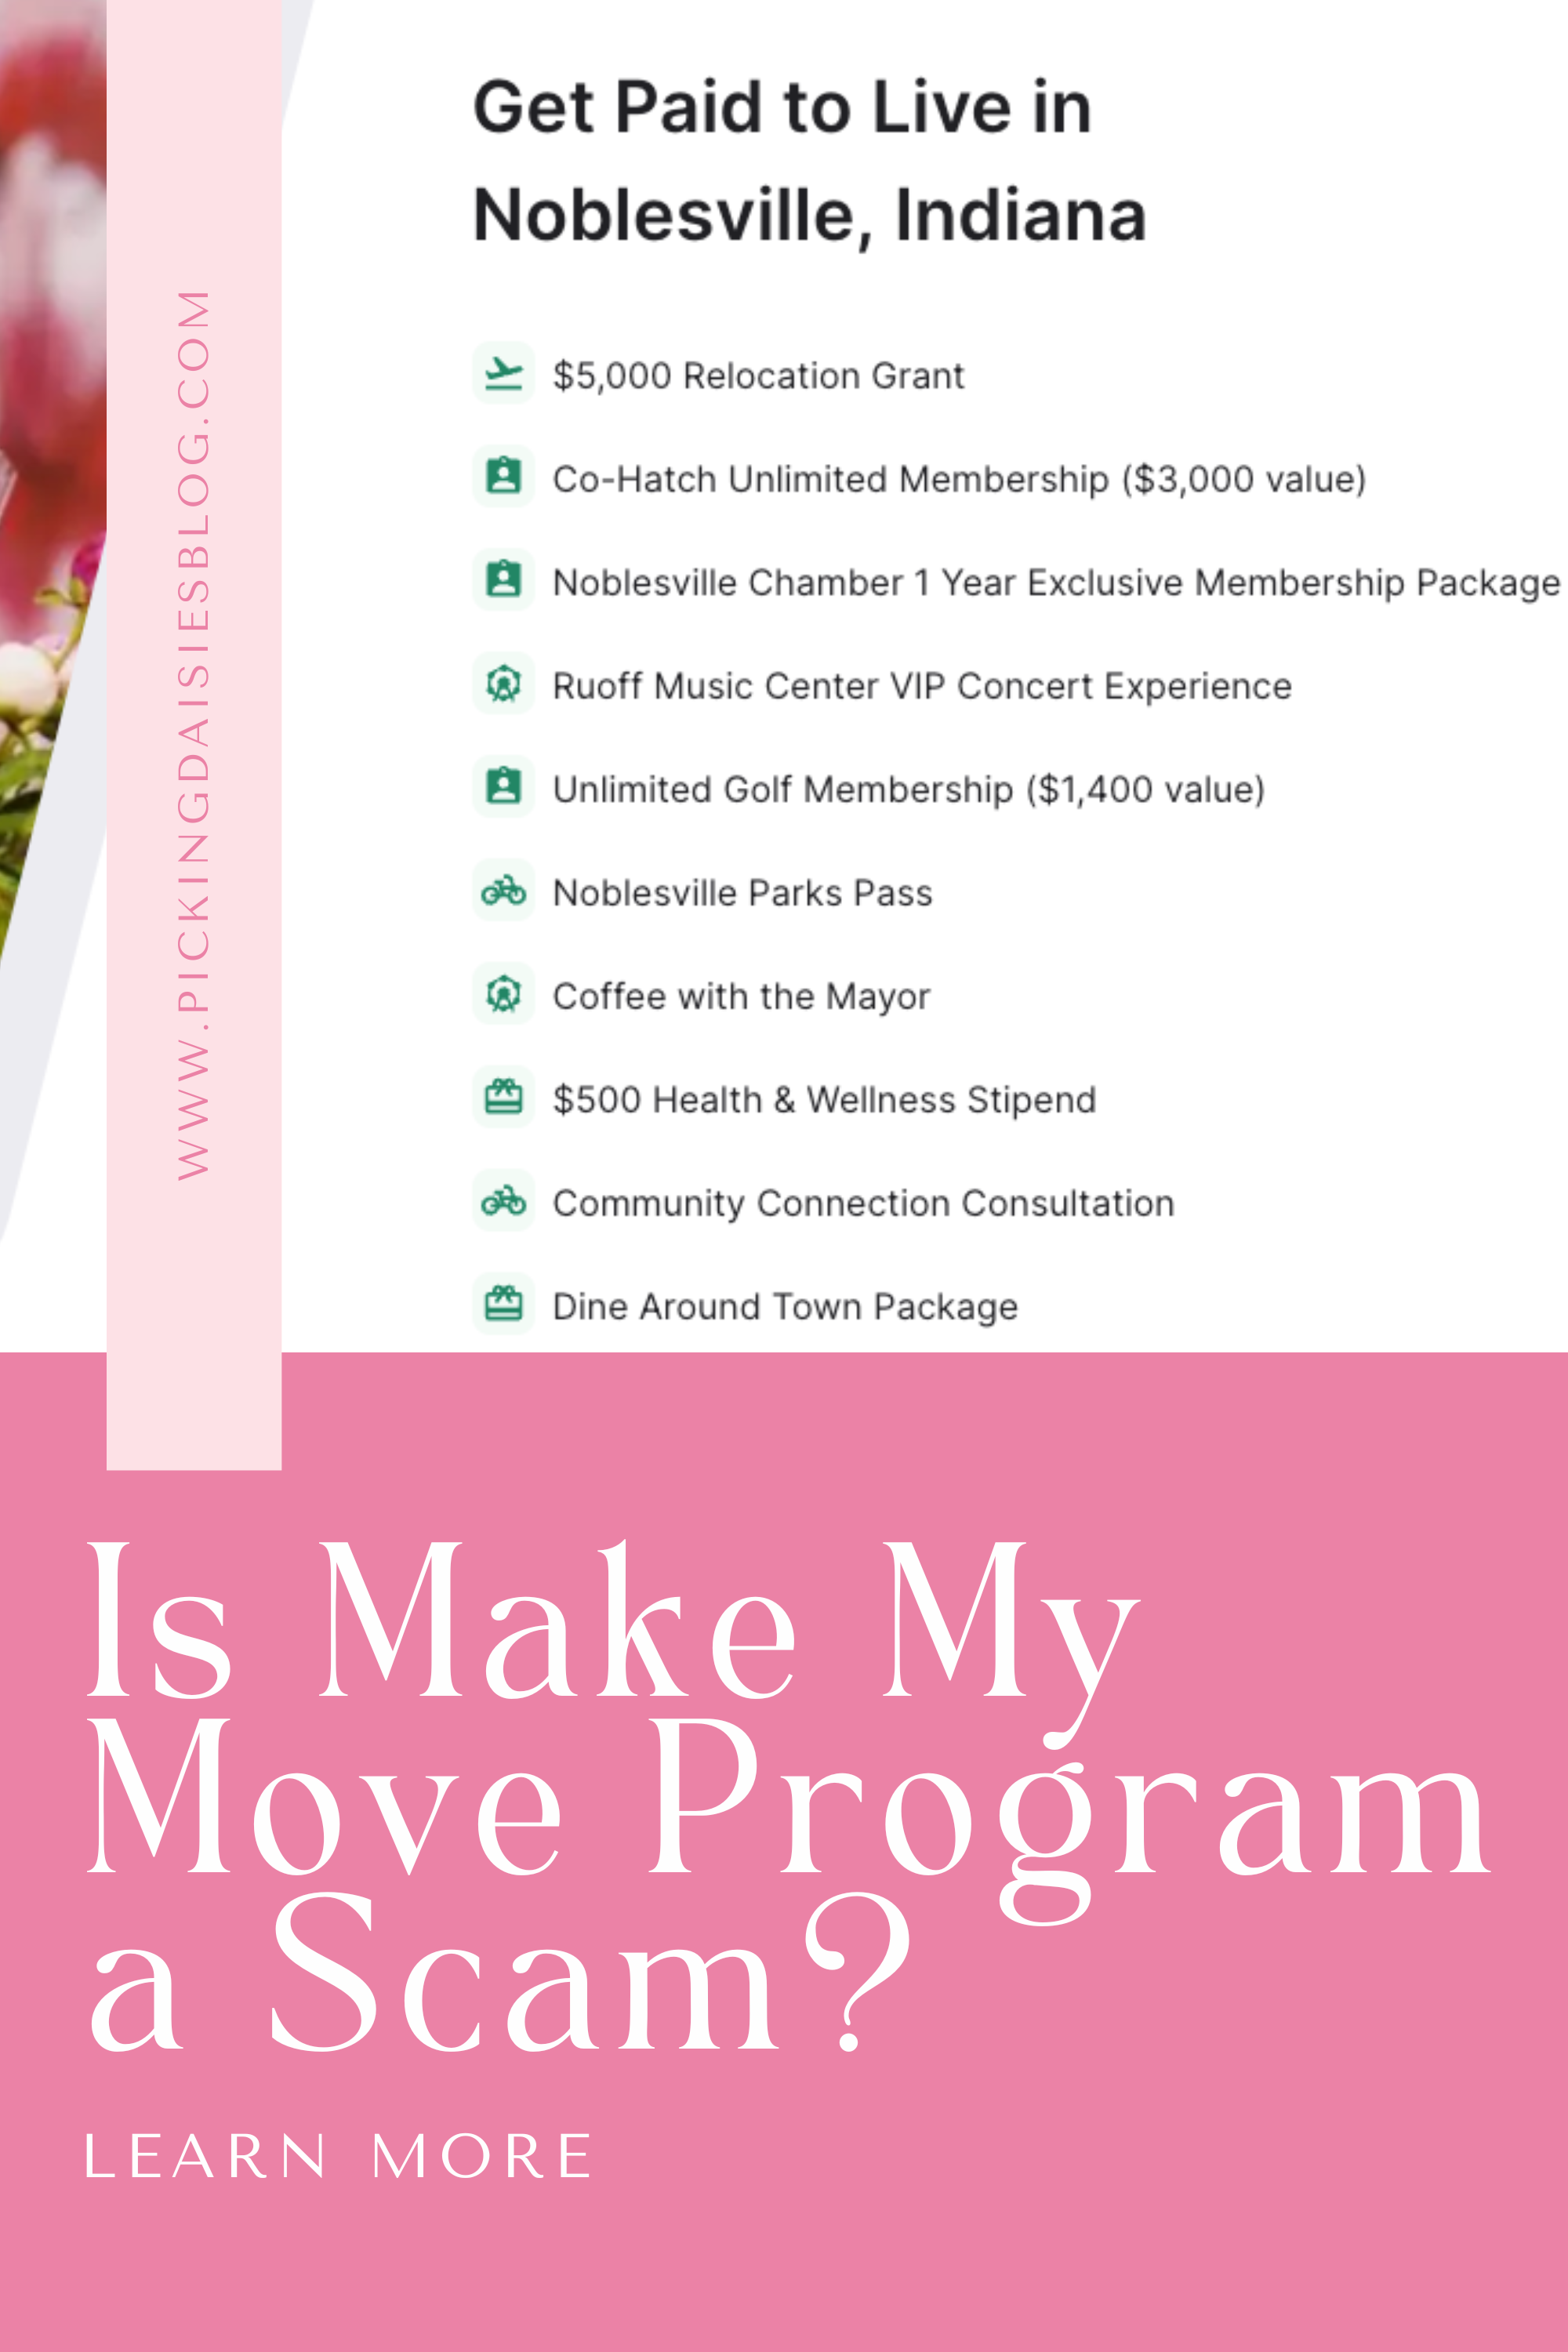 Make My Move Program, relocation grant, remote workers, entrepreneurs, financial incentives, Noblesville, Indiana, small-town charm, family-friendly, top-rated schools, vibrant arts scene, recreational activities, hidden gem, community-focused, COhatch Unlimited Membership, networking, collaboration, Ruoff Music Center, VIP concert experience, Coffee with the Mayor, skepticism, genuine, real person, financial support, community integration, local resources, thriving community, economic growth, skeptics, debunking scam myths, life-changing opportunity, professional growth, lasting connections, prosperous future, misconceptions, sense of belonging, warmth, fulfillment, possibilities, transformation, embrace, beautiful city, opportunities, tight-knit community, meaningful life, talented individuals, thriving environment, collaboration, growth.